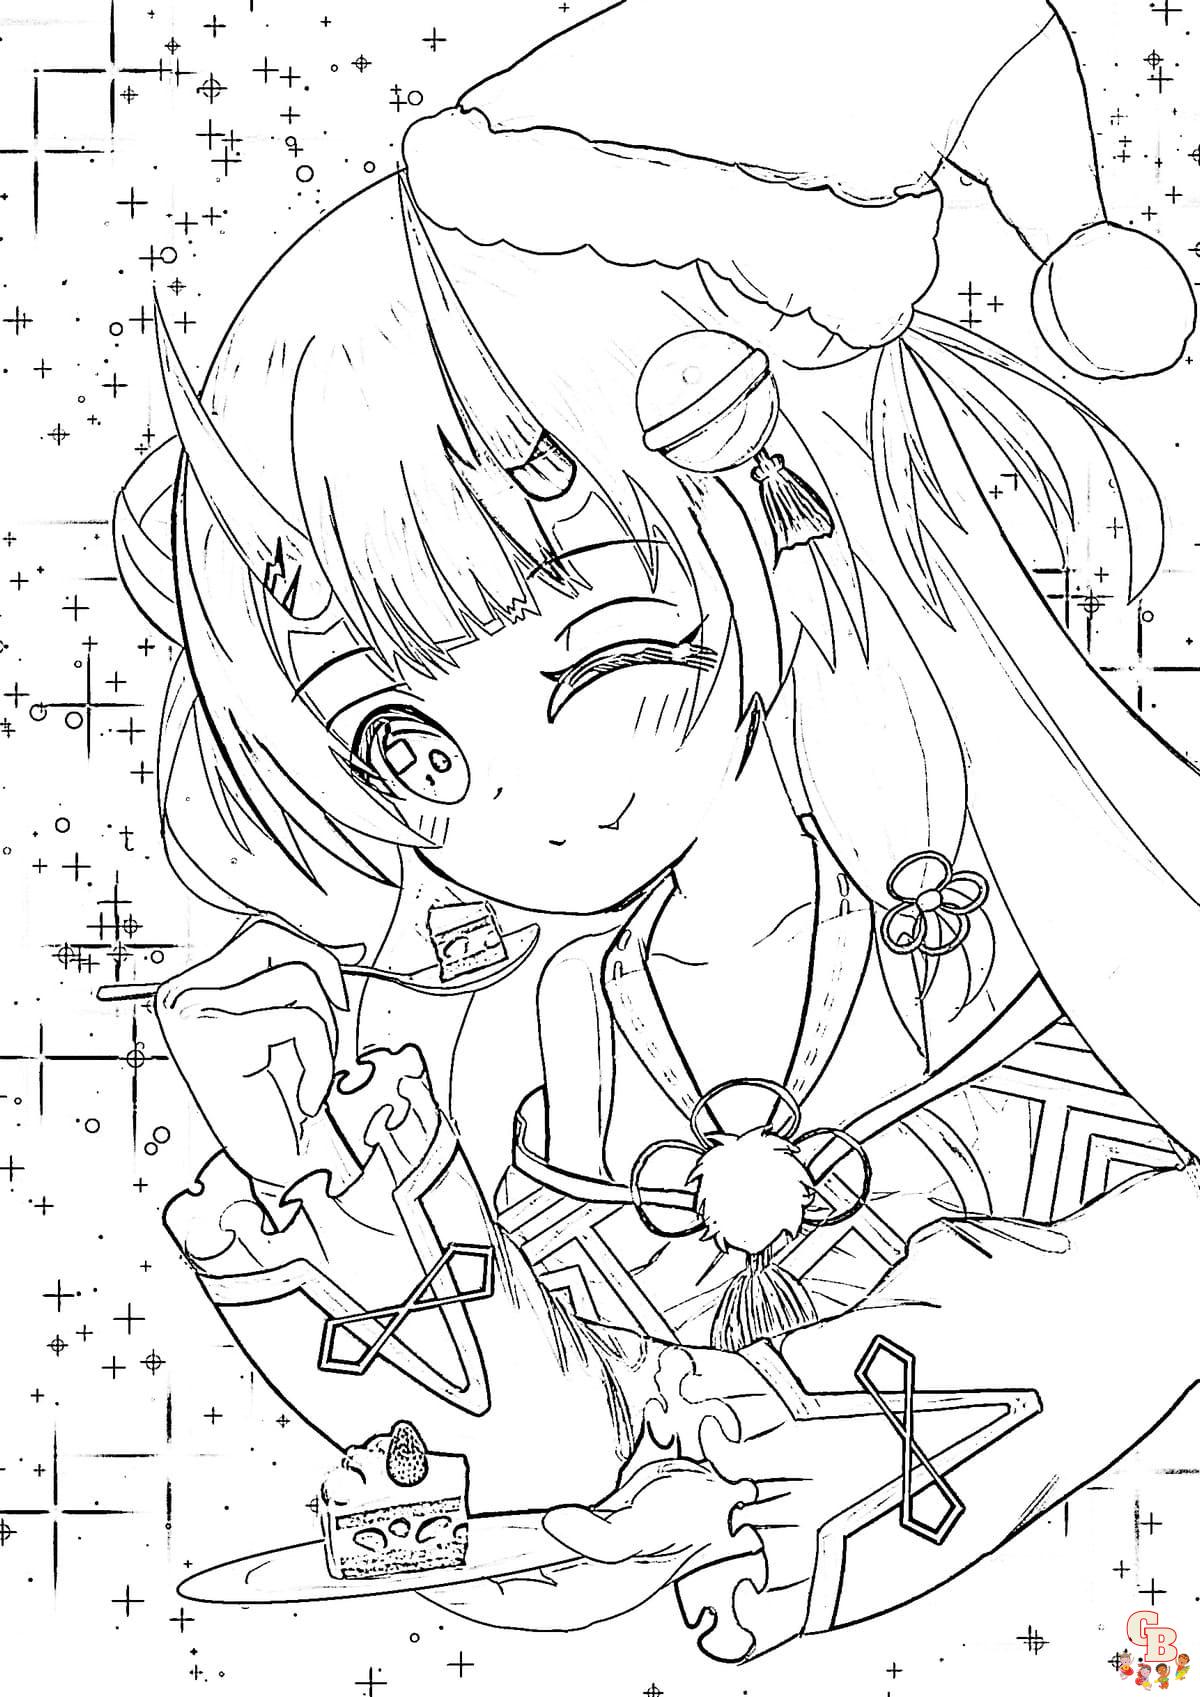 Free Printable Anime Coloring Pages for Adults and Kids - Lystok.com-demhanvico.com.vn